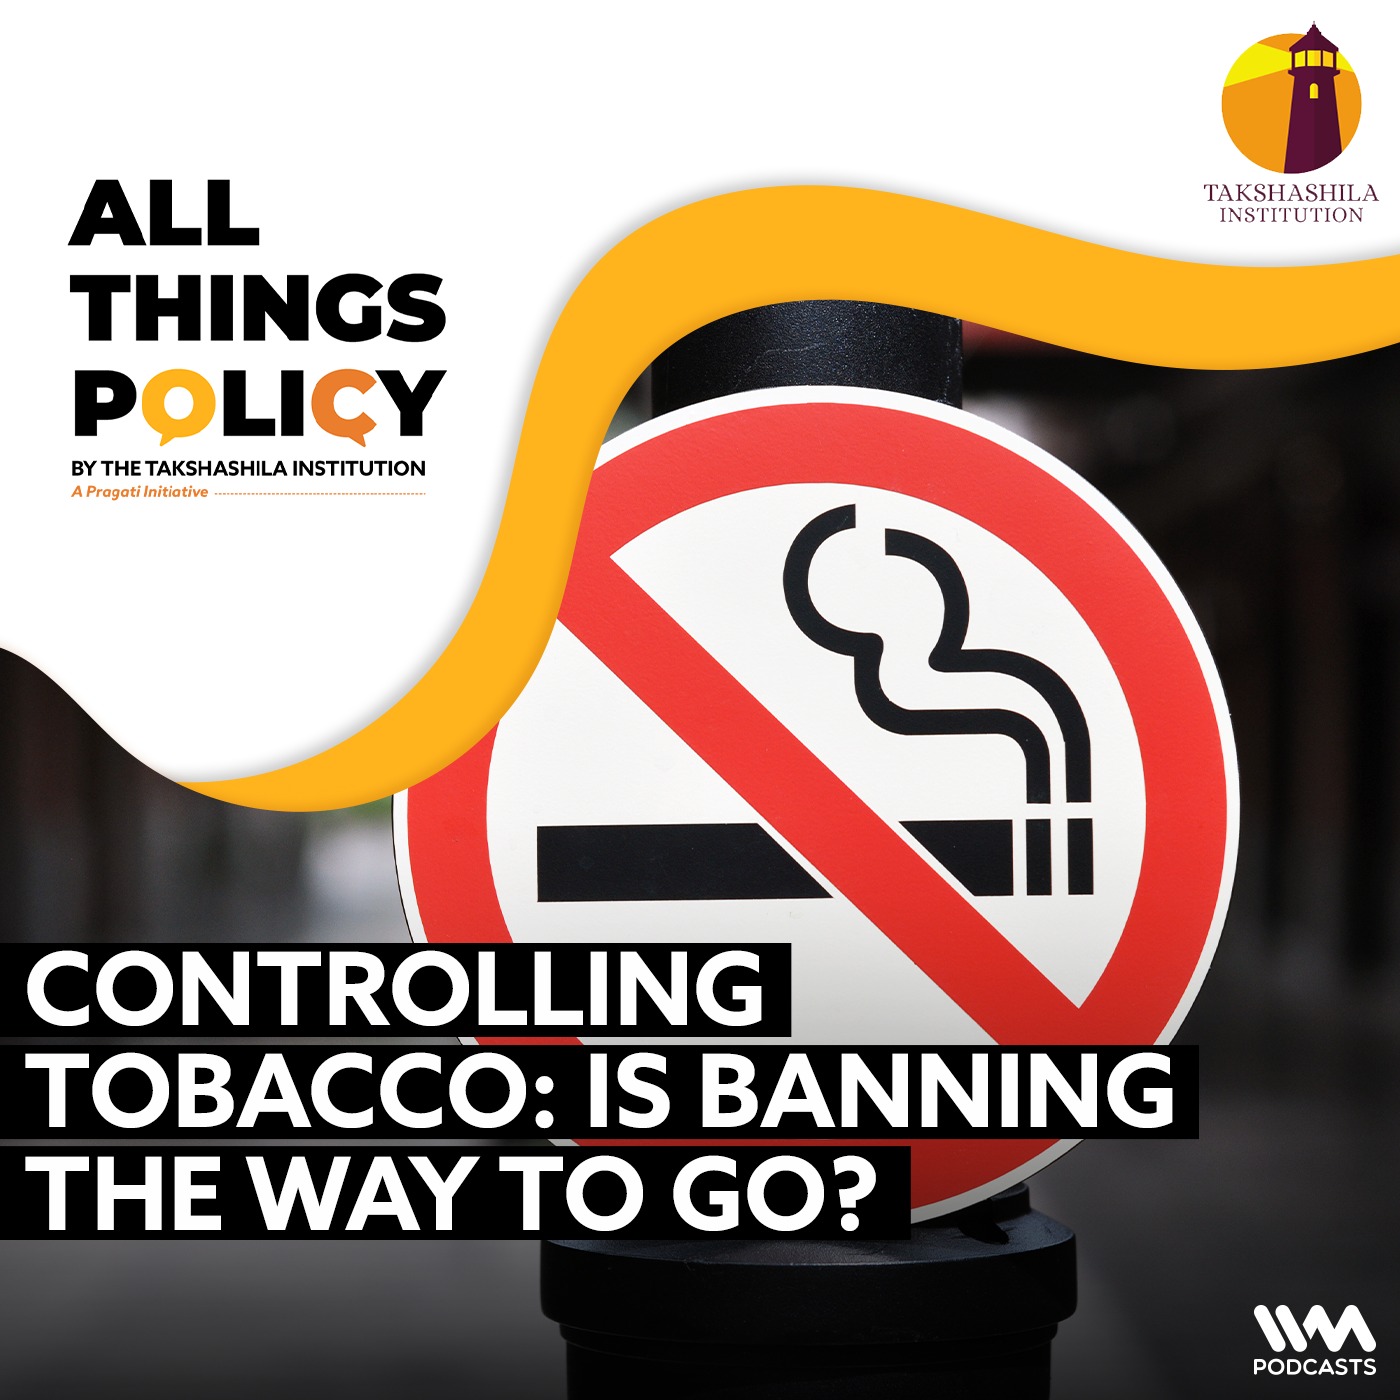 Controlling Tobacco: Is Banning the Way to Go?